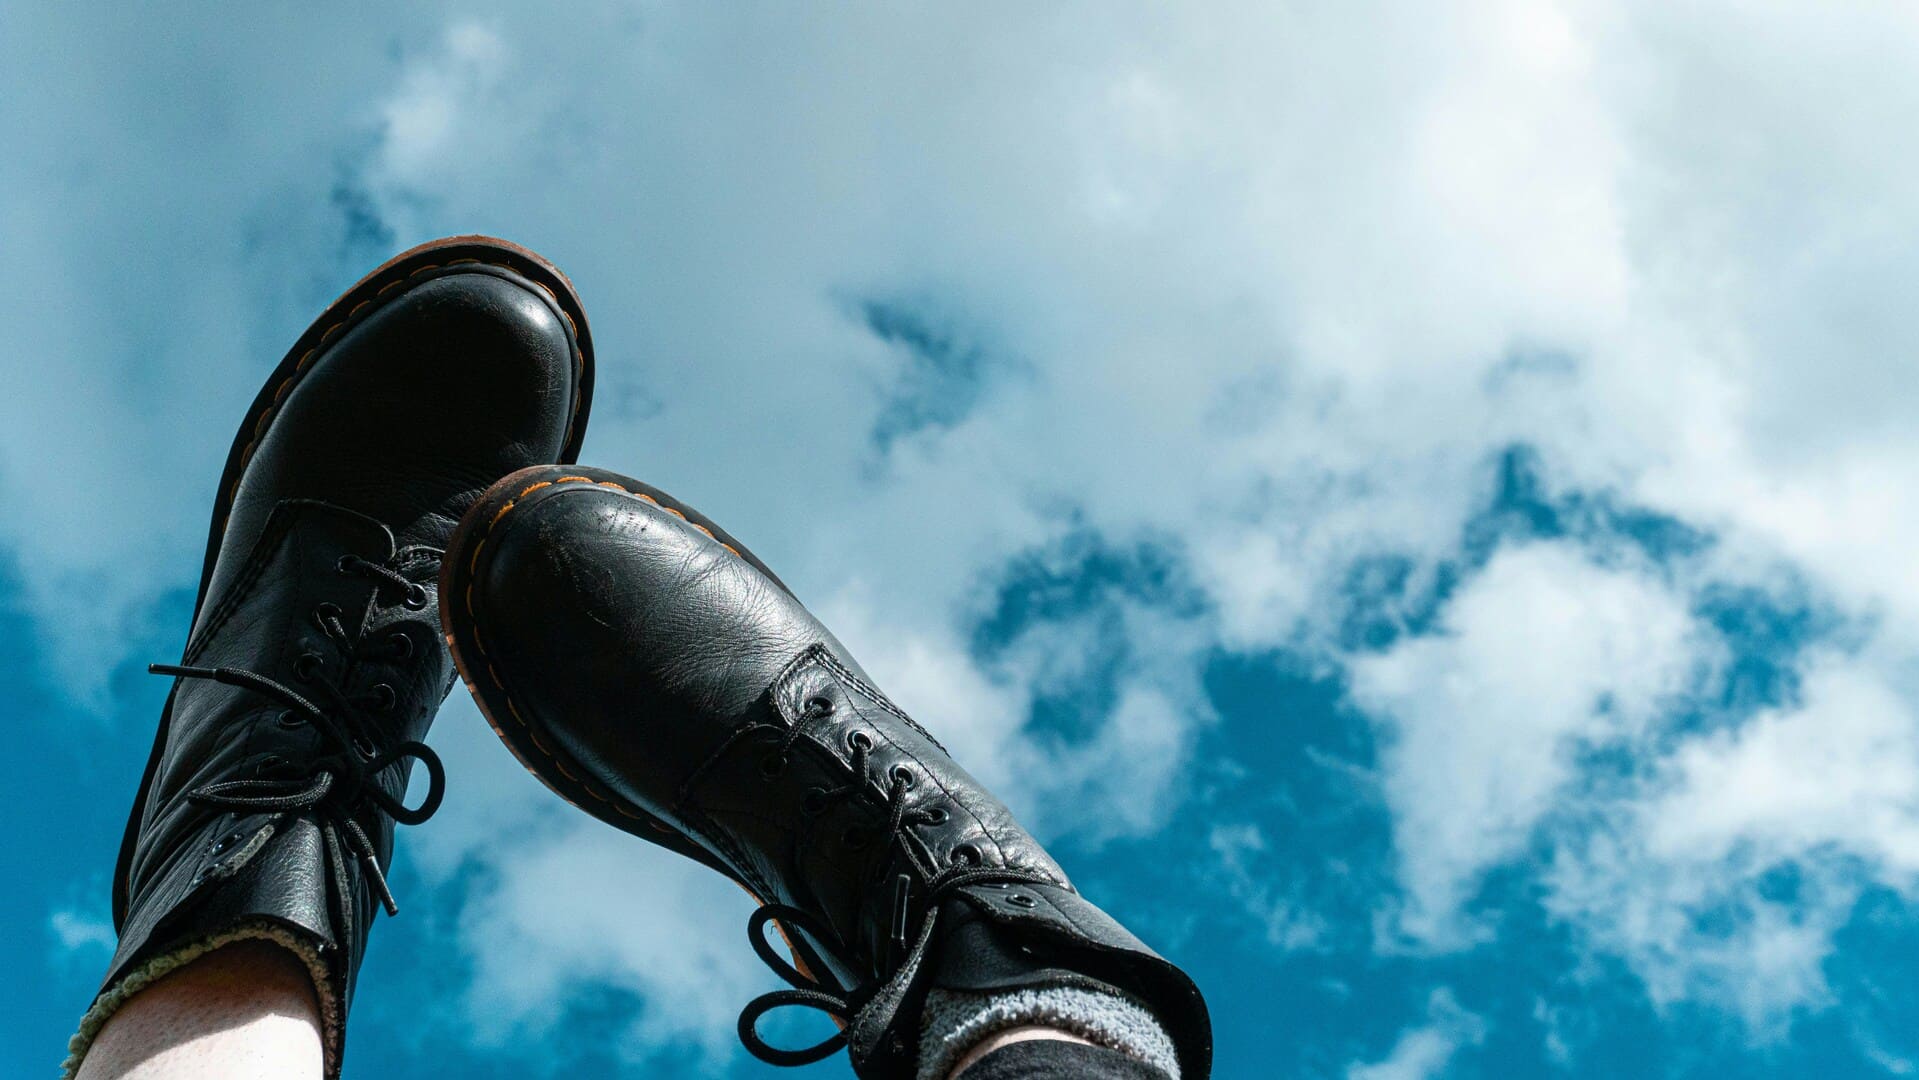 doc martens disaster: why the iconic boot brand is struggling to innovate